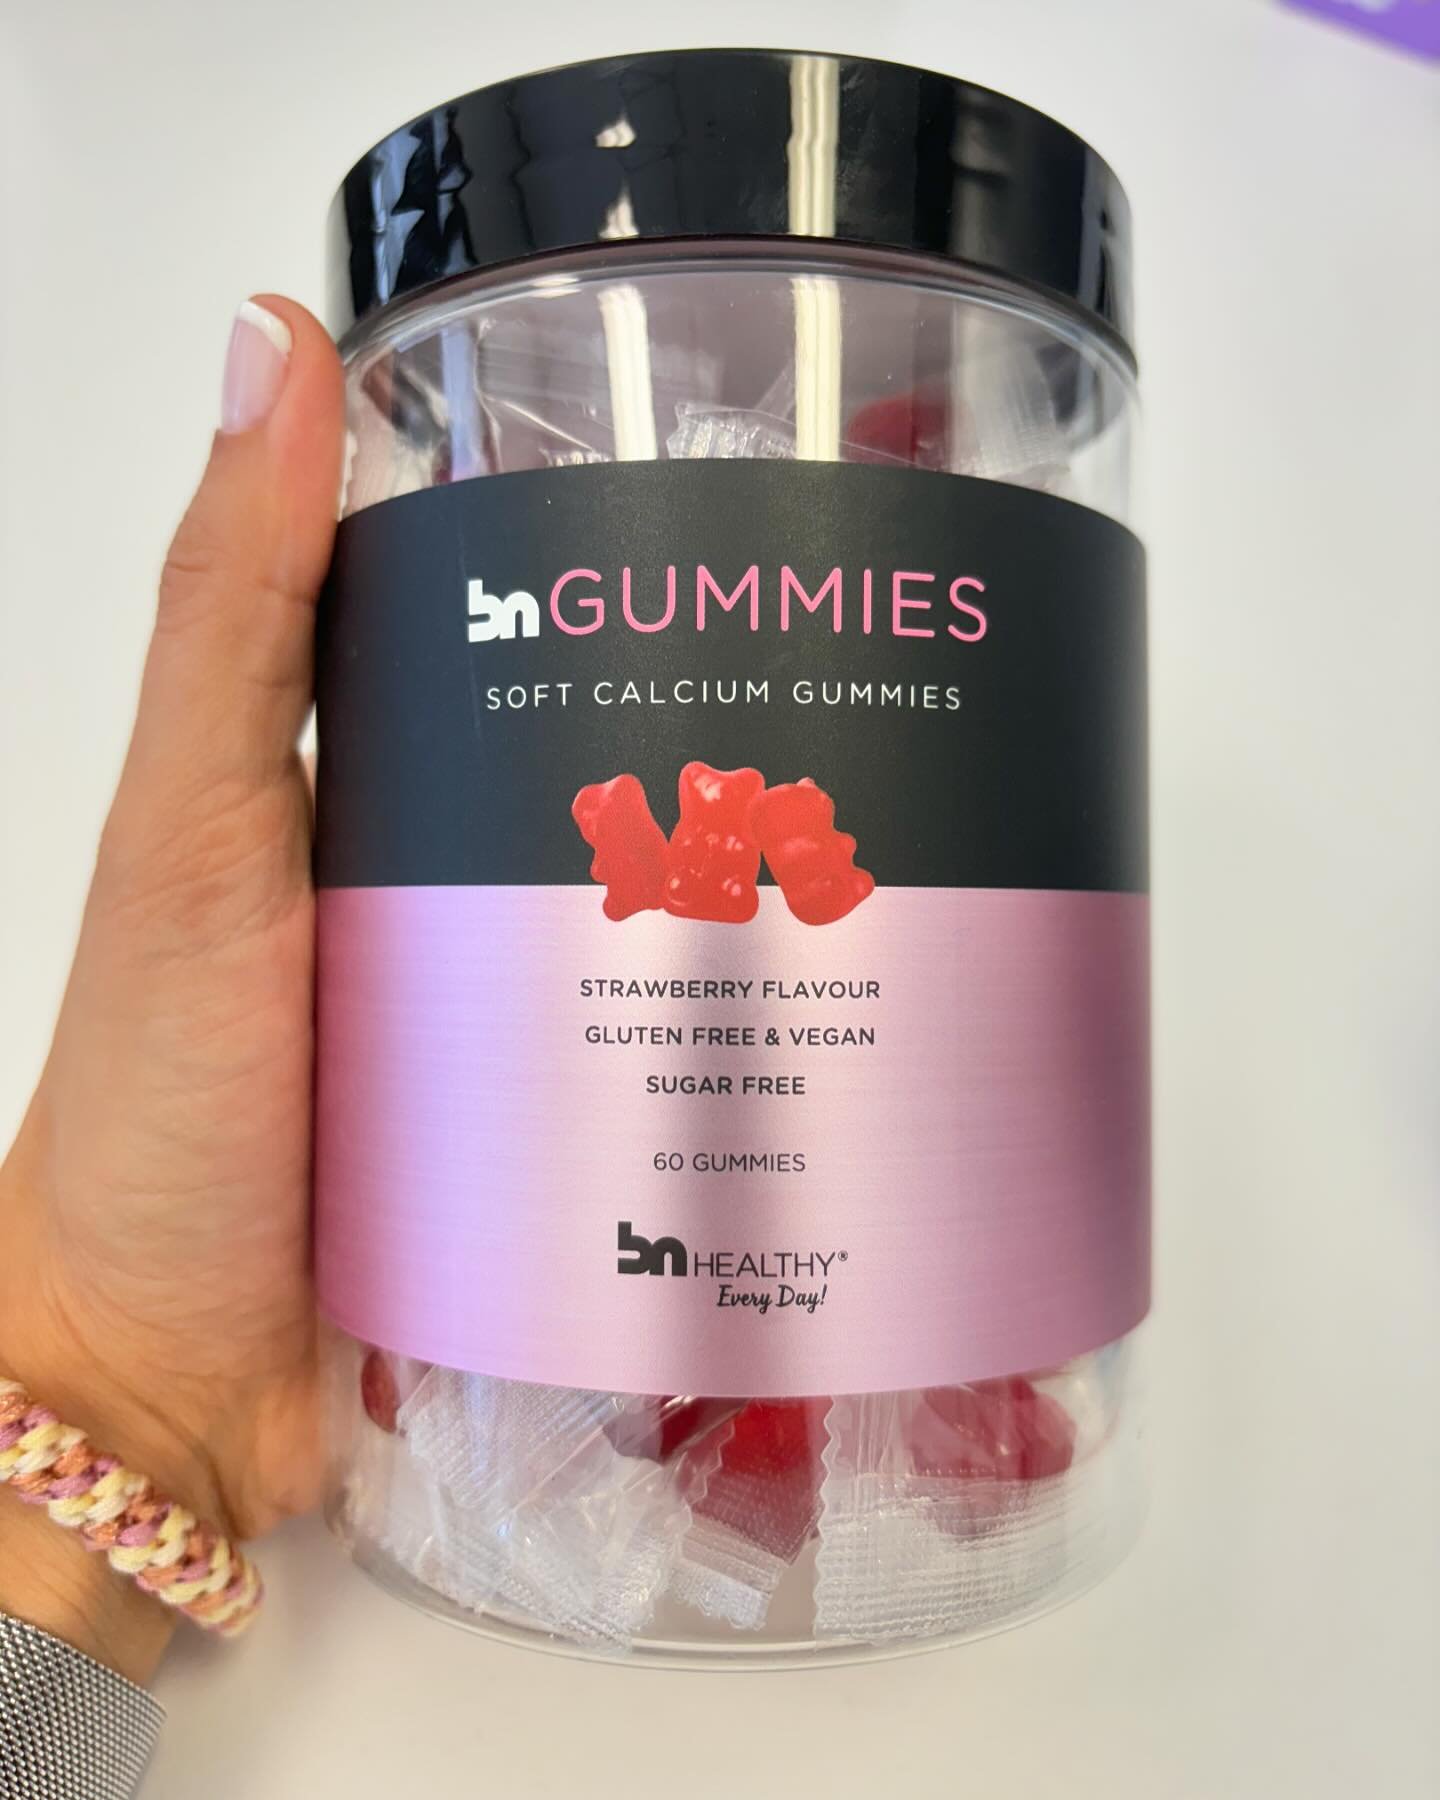 It&rsquo;s often hard to achieve the recommended daily intake of calcium and vitamin D. Whether you&rsquo;re dairy intolerant, dislike dairy or simple don&rsquo;t eat the adequate number of serves per day, these chocolate balls and gummies are a fun 